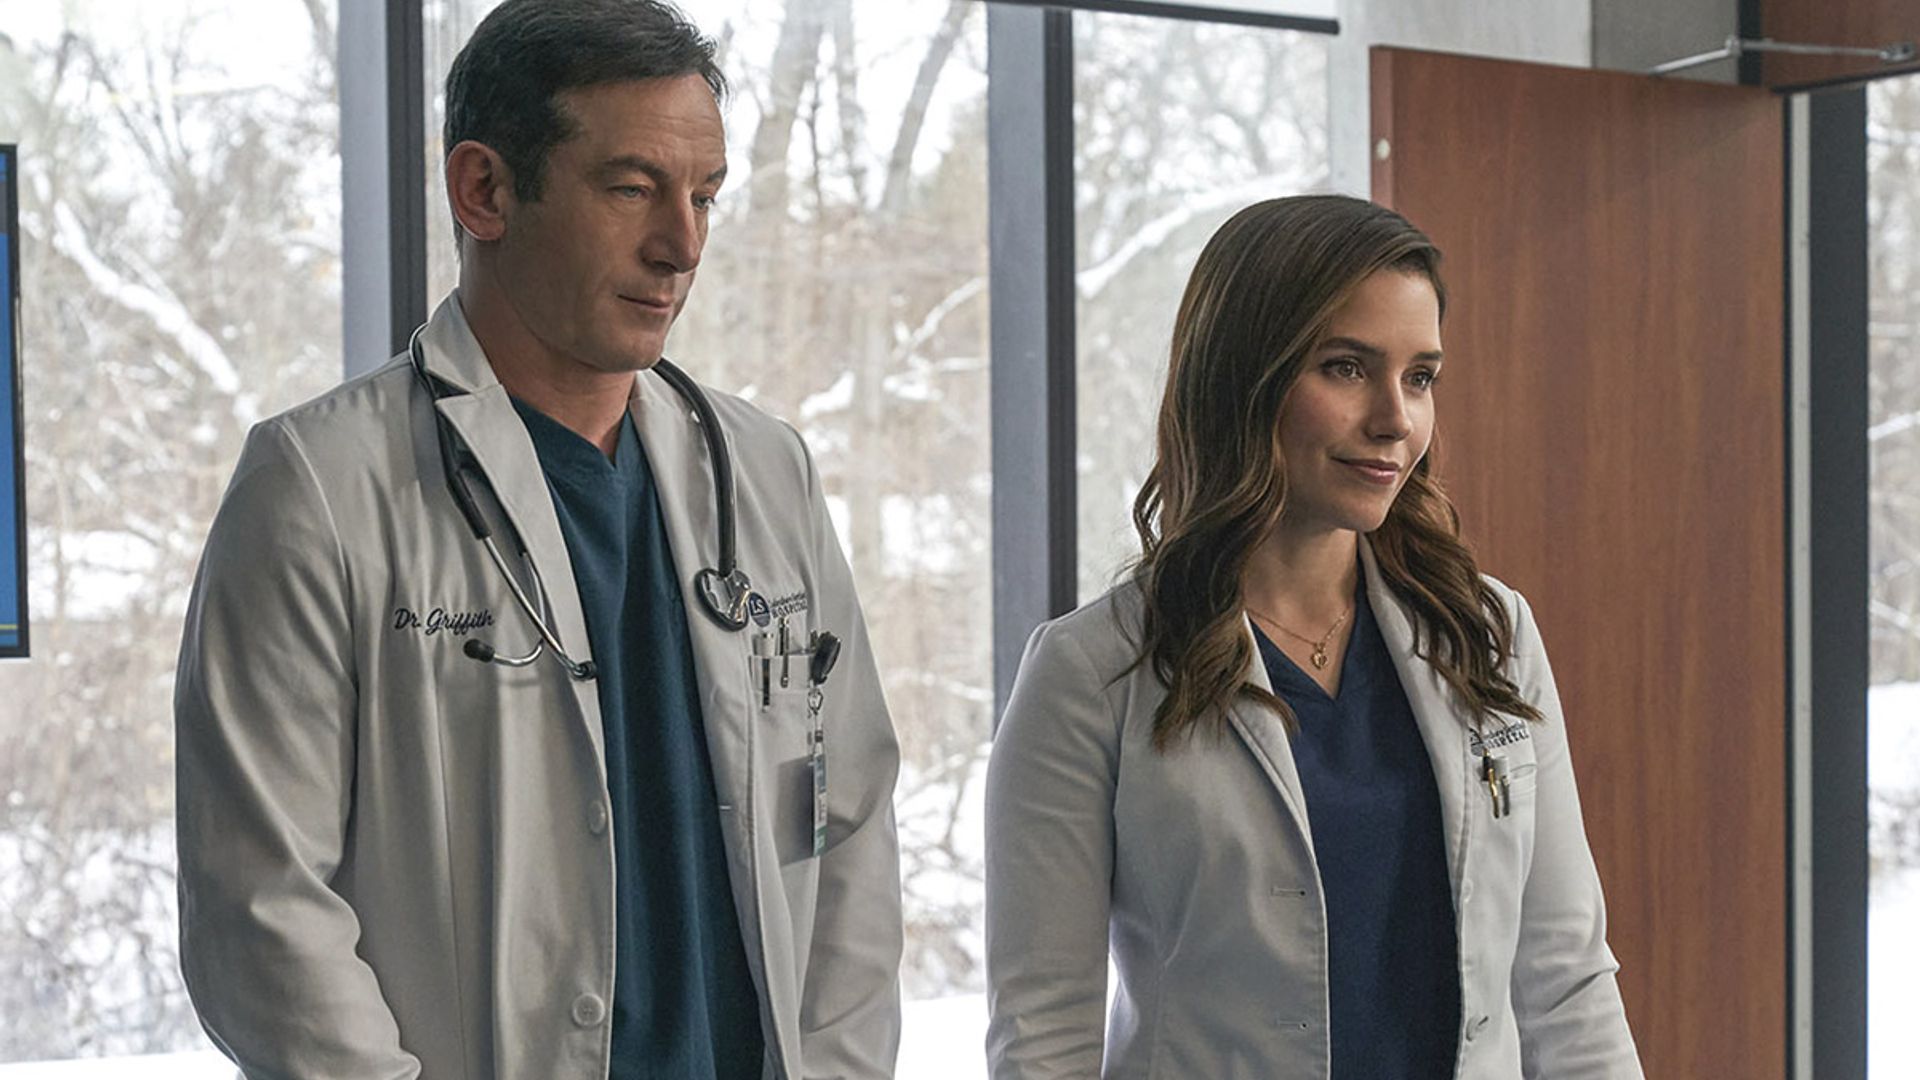 Why Good Sam is the new medical drama you'll be obsessed with